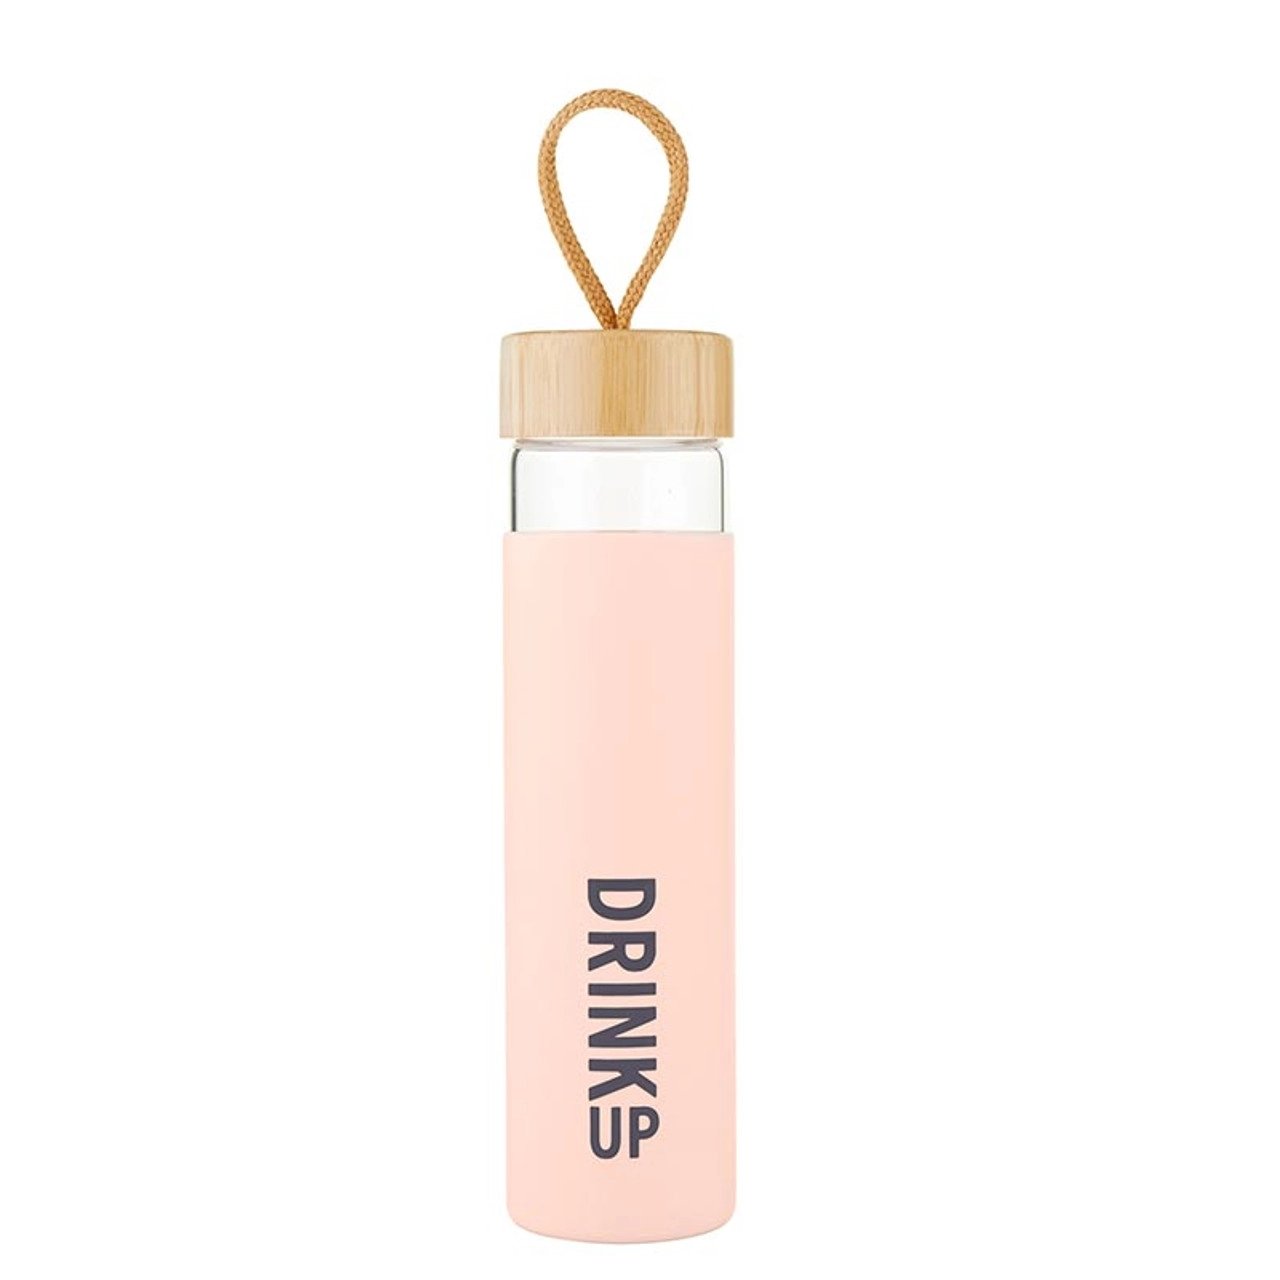 Drink Up Glass Water Bottle | 20 oz. | In a Gift Tube